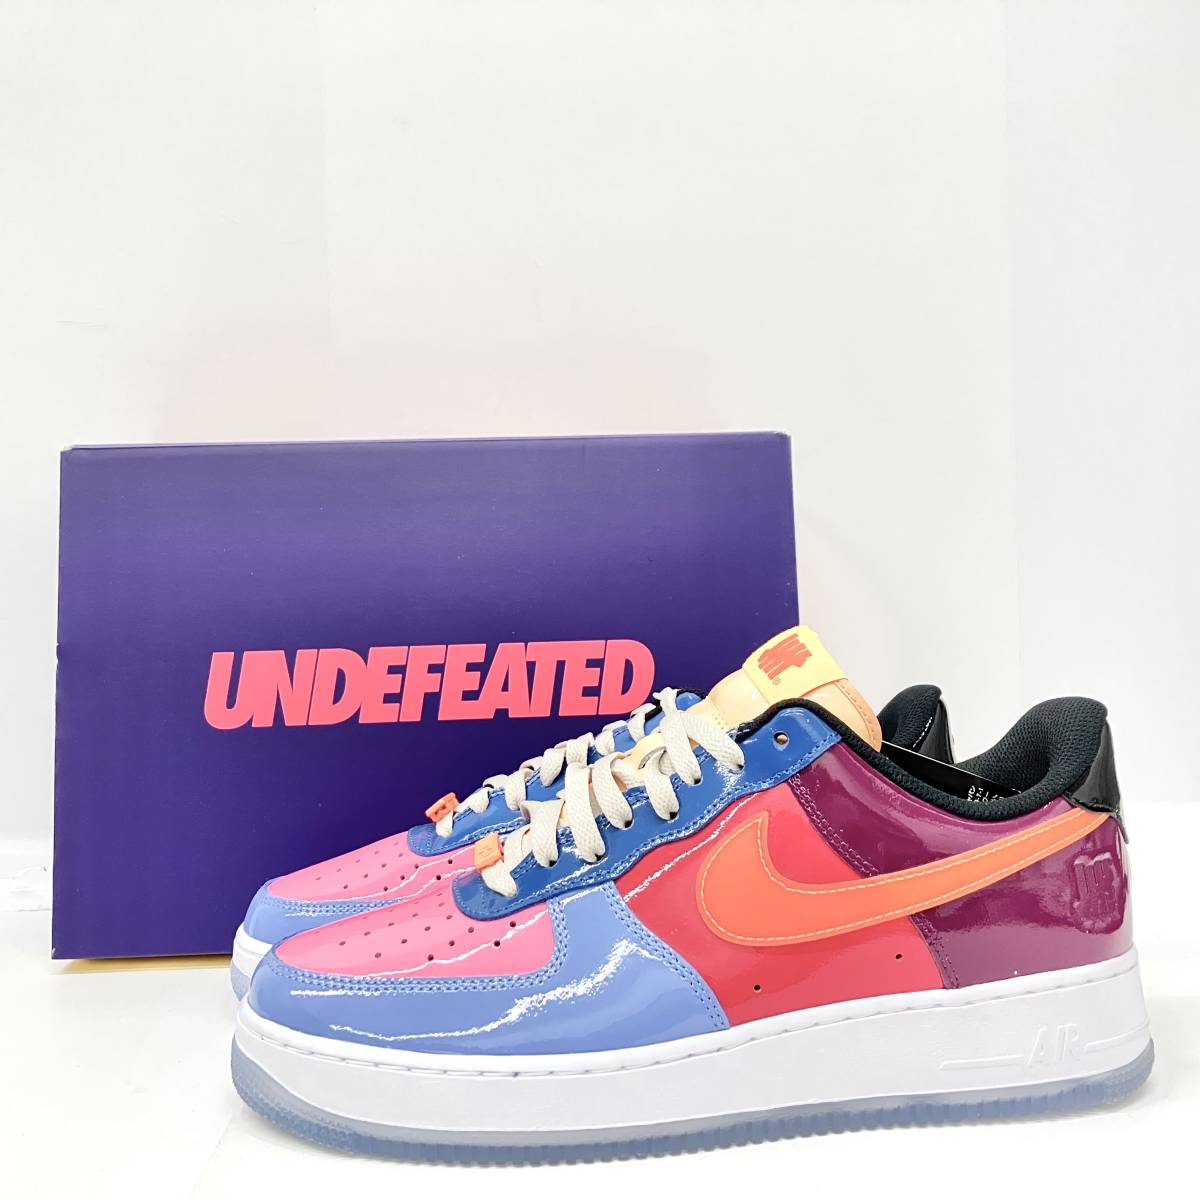 UNDEFEATED × Nike Air Force 1 Low SP 'Total Orange' アンディフィーテッド × ナイキ エアフォース1 ロー DV5255-400 27.5cm